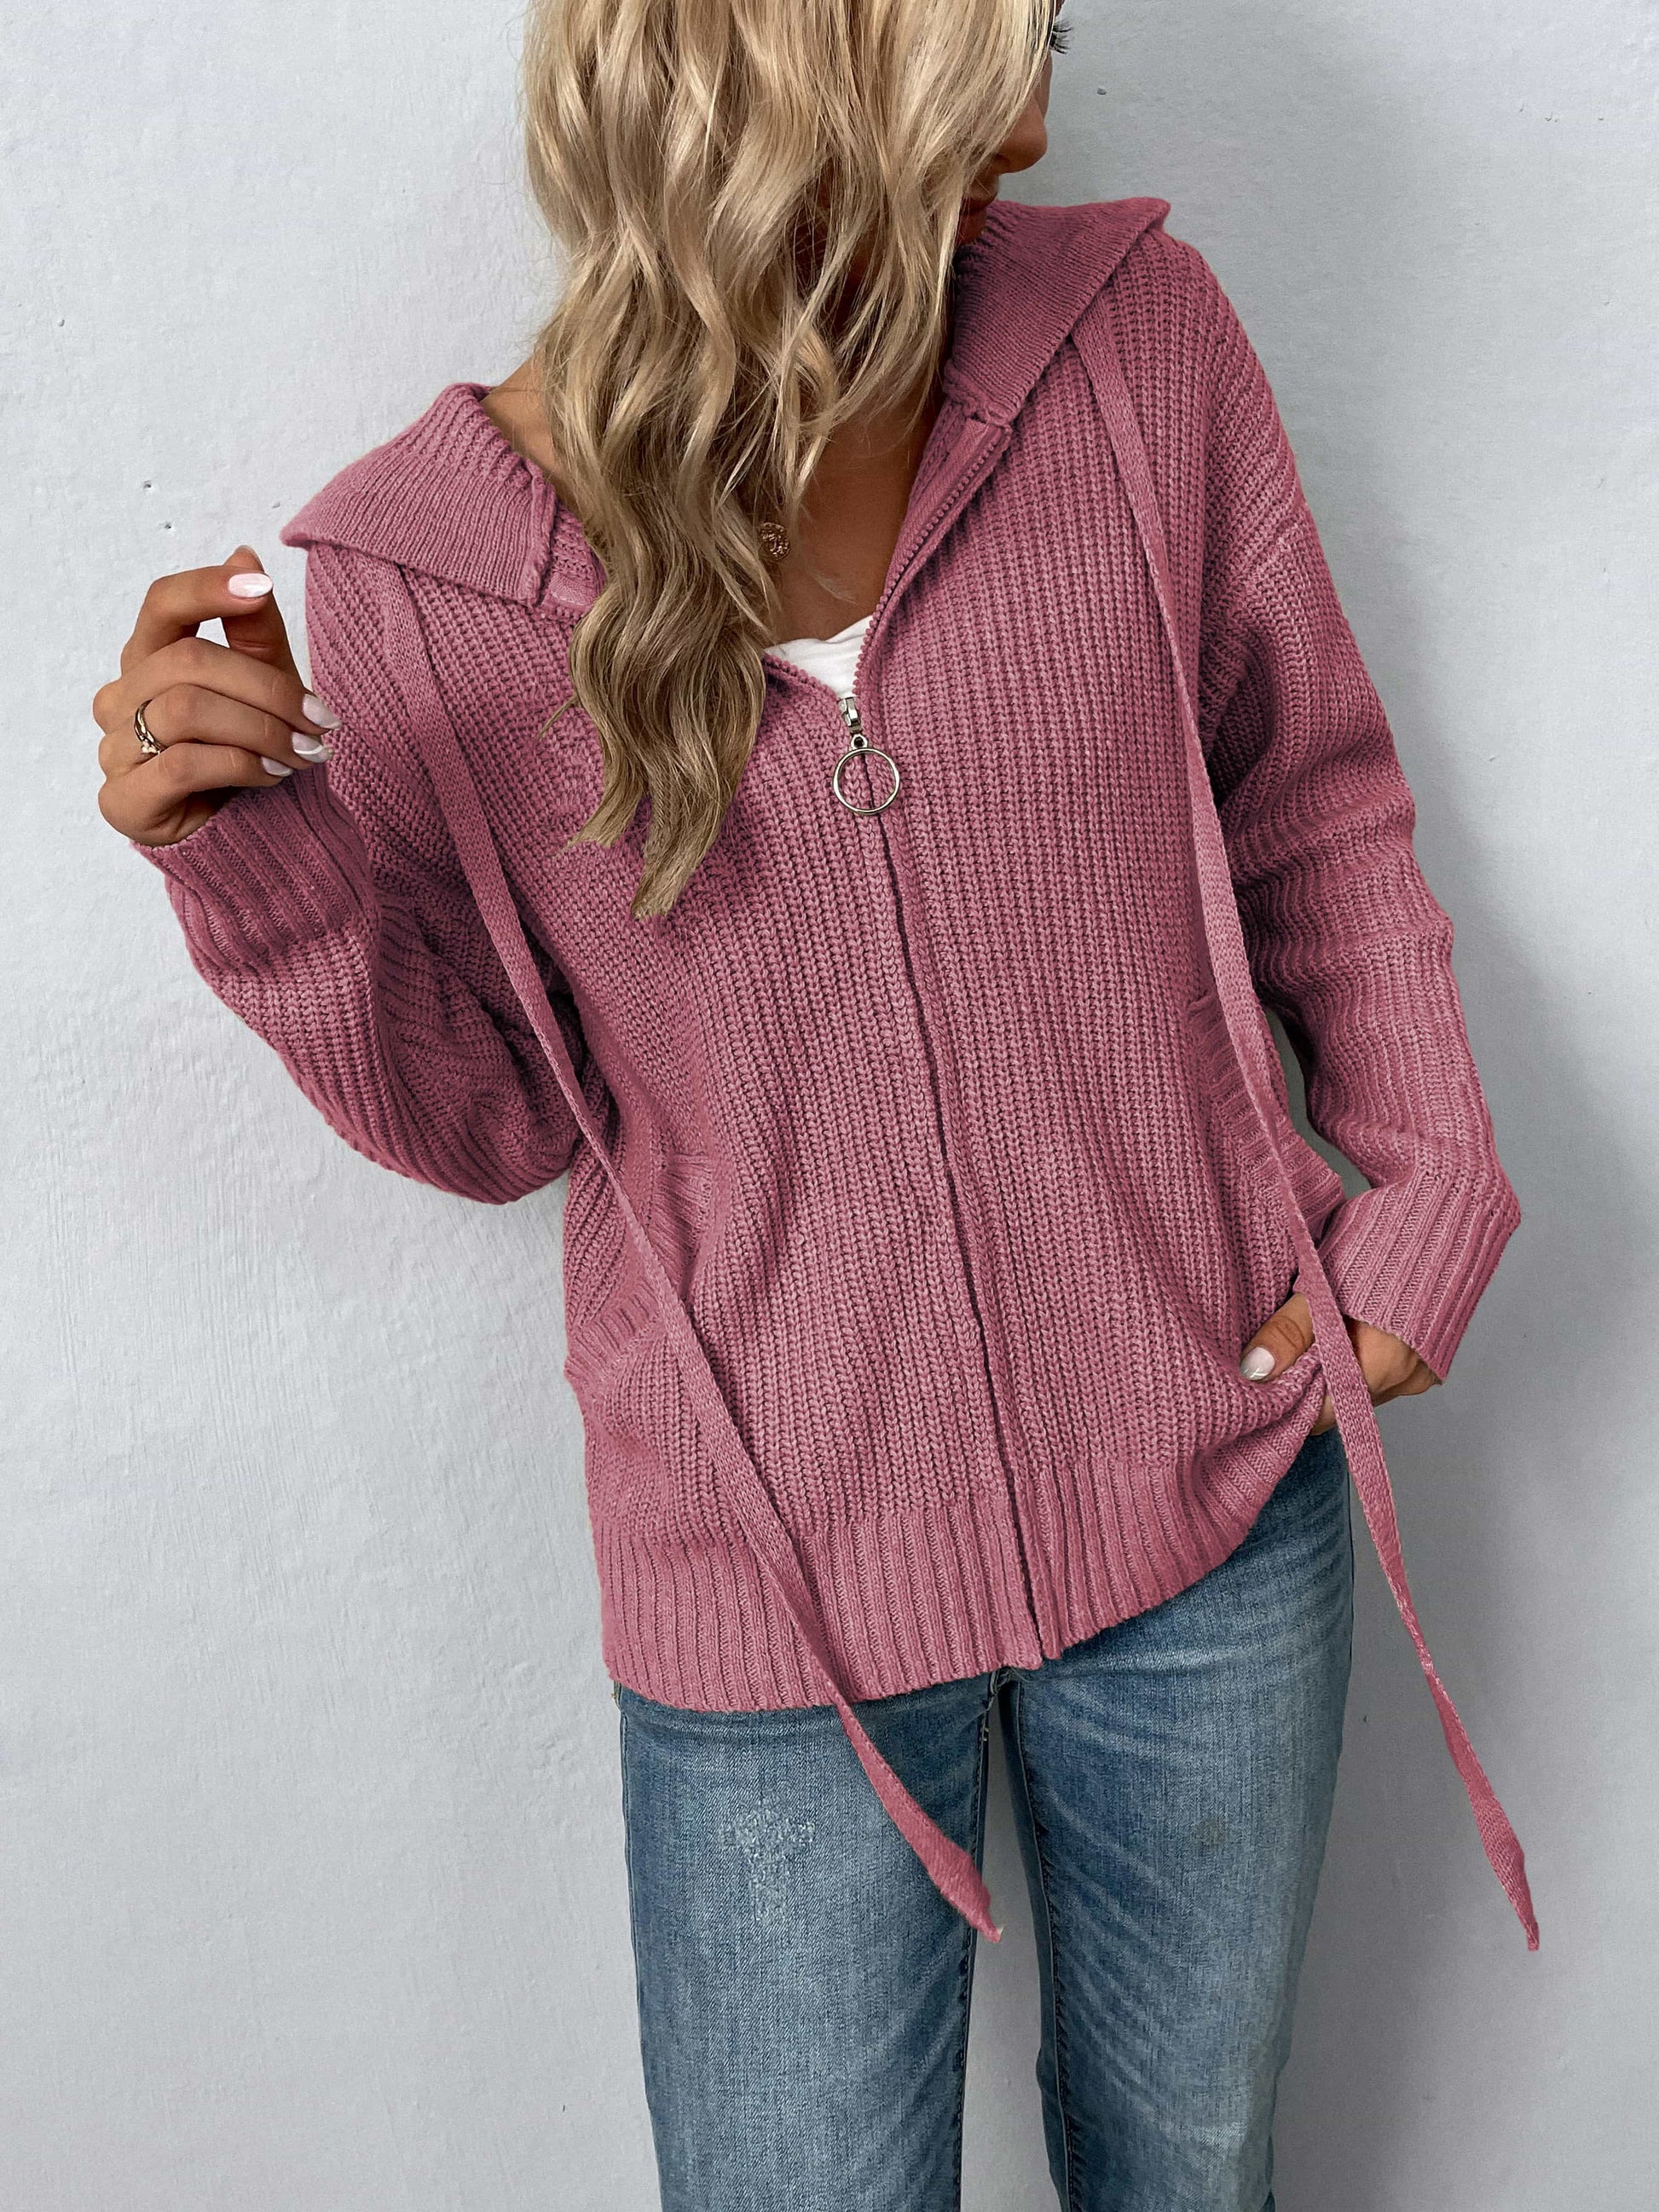 Zip-Up Drawstring Detail Hooded Cardigan - Women’s Clothing & Accessories - Shirts & Tops - 6 - 2024